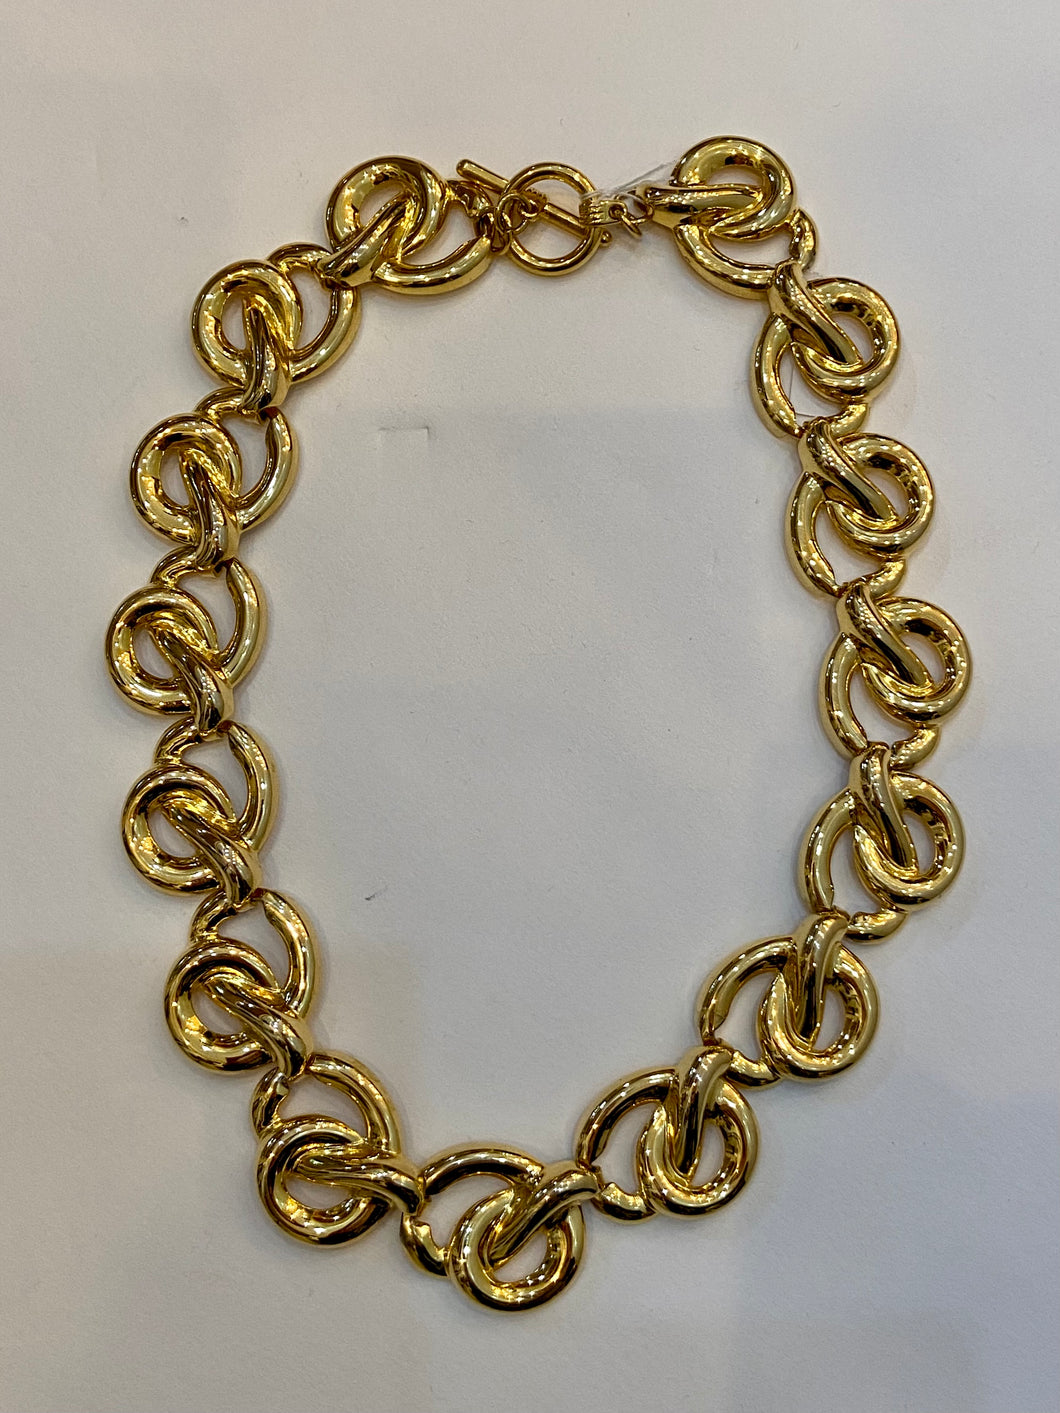 Vintage Swirly gold link necklace